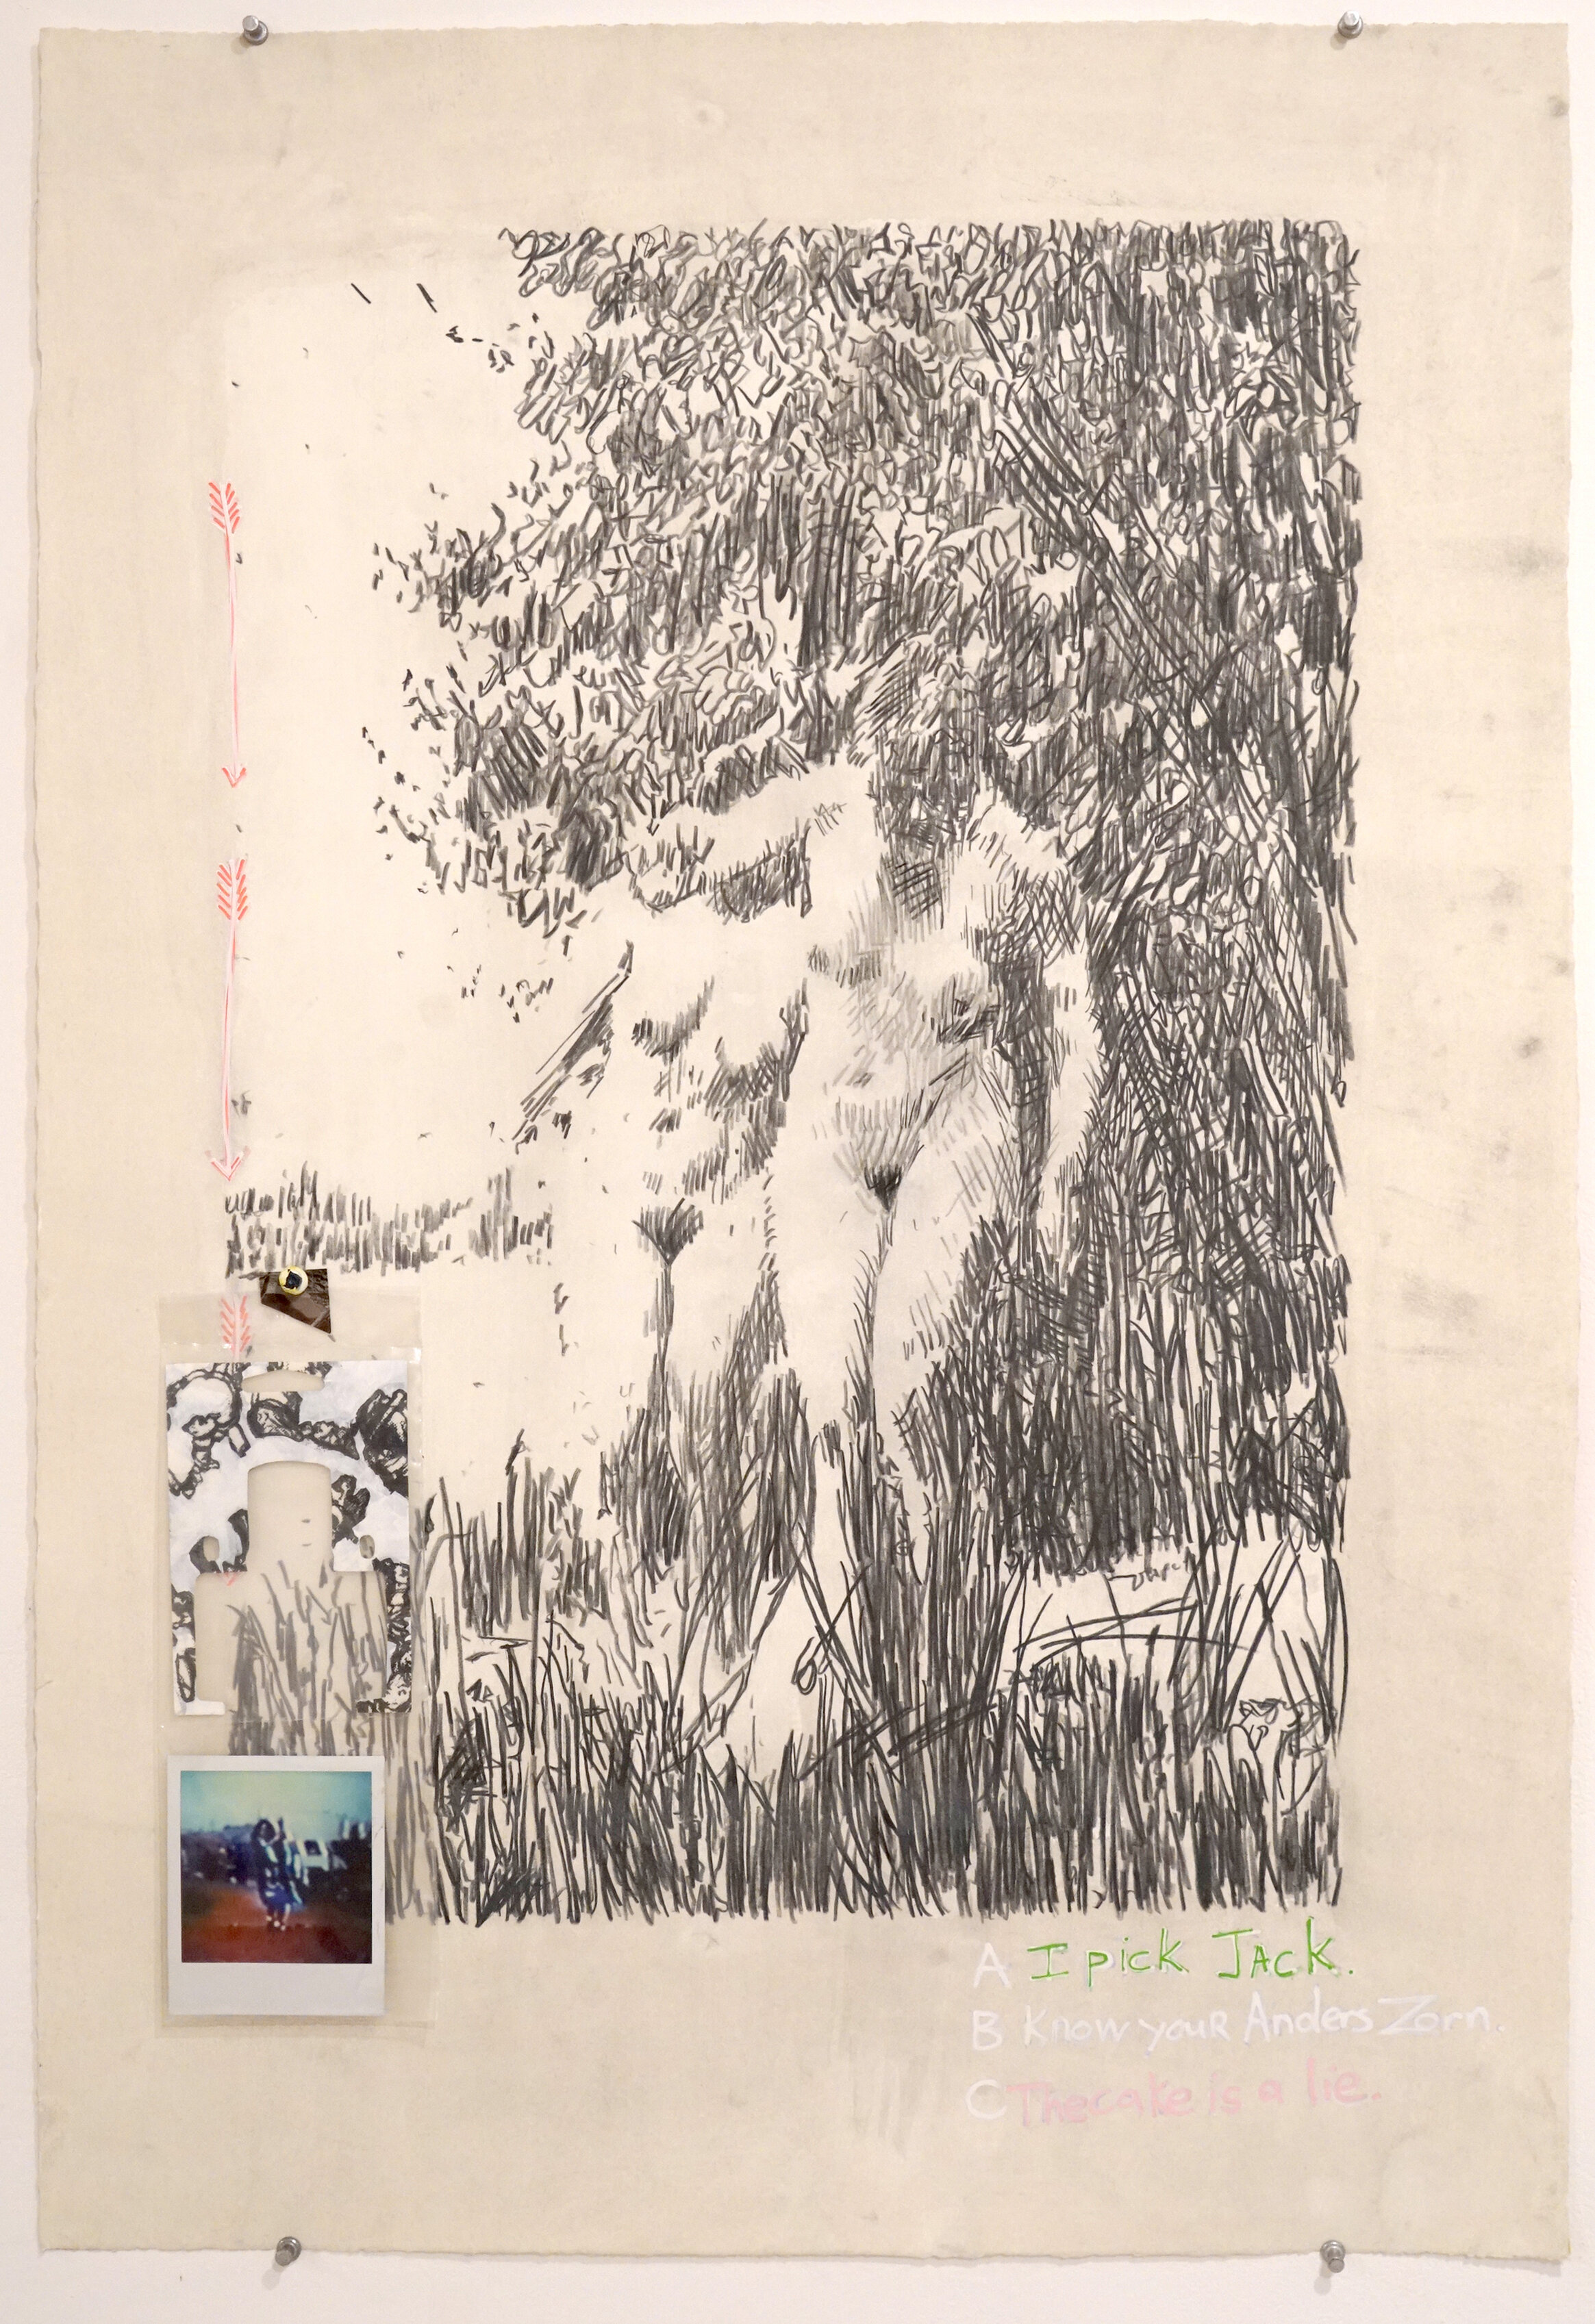  Joe Stauber (PiV faculty ‘08–’09),  "Pick Jack" After A. Zorn , 2009. Mixed media drawing on paper with polaroid, 22 X 30 in. 